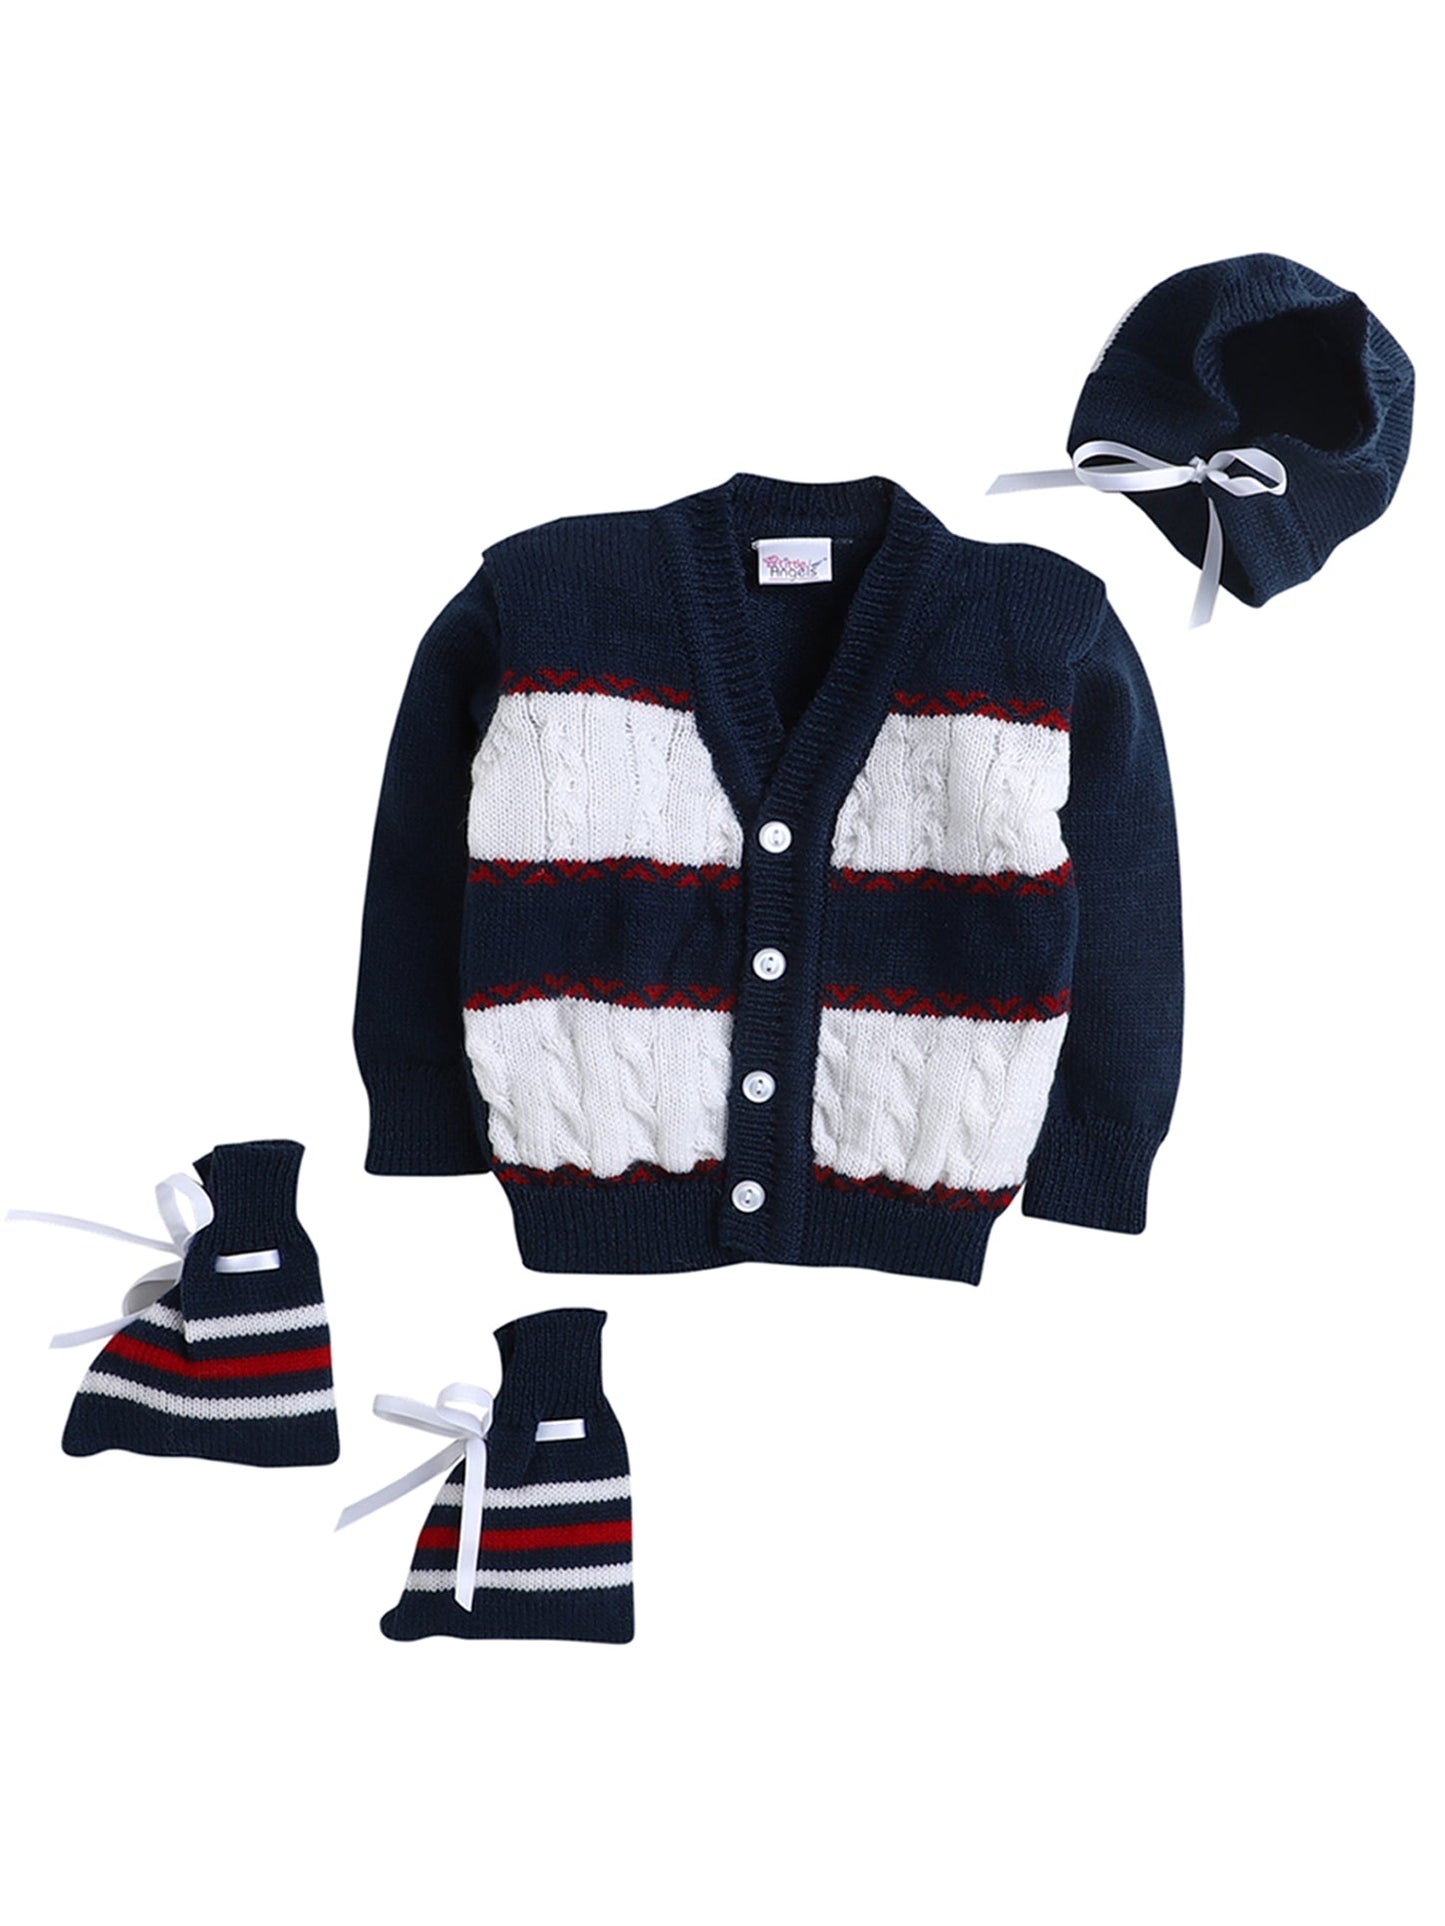 Colorblock Knitted Sweater Sets for Baby Boy and Baby Girl